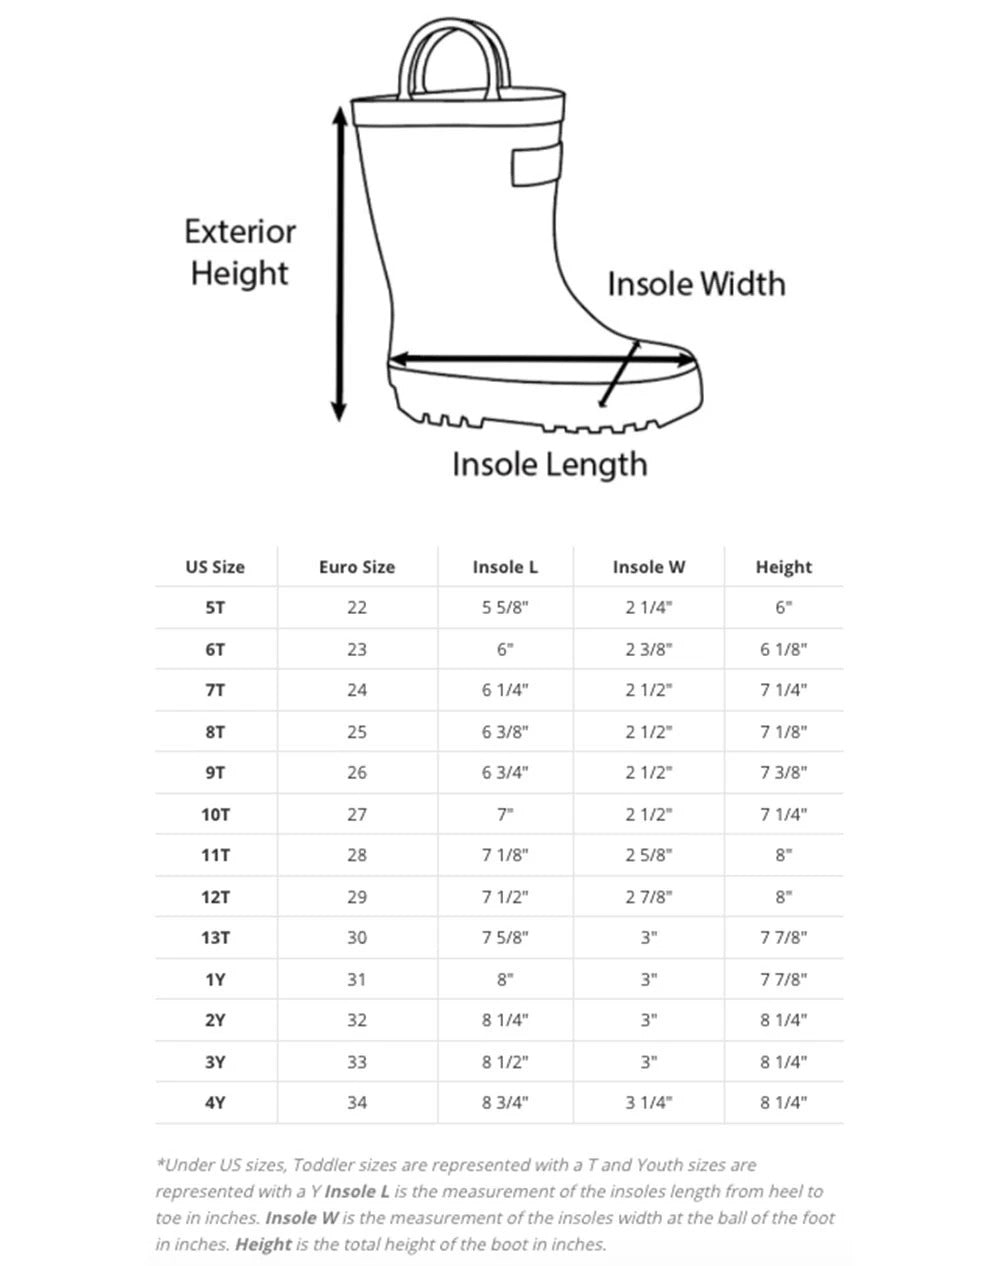 How A Dress Shoe Should Fit - Guide To Finding Your Shoe Size